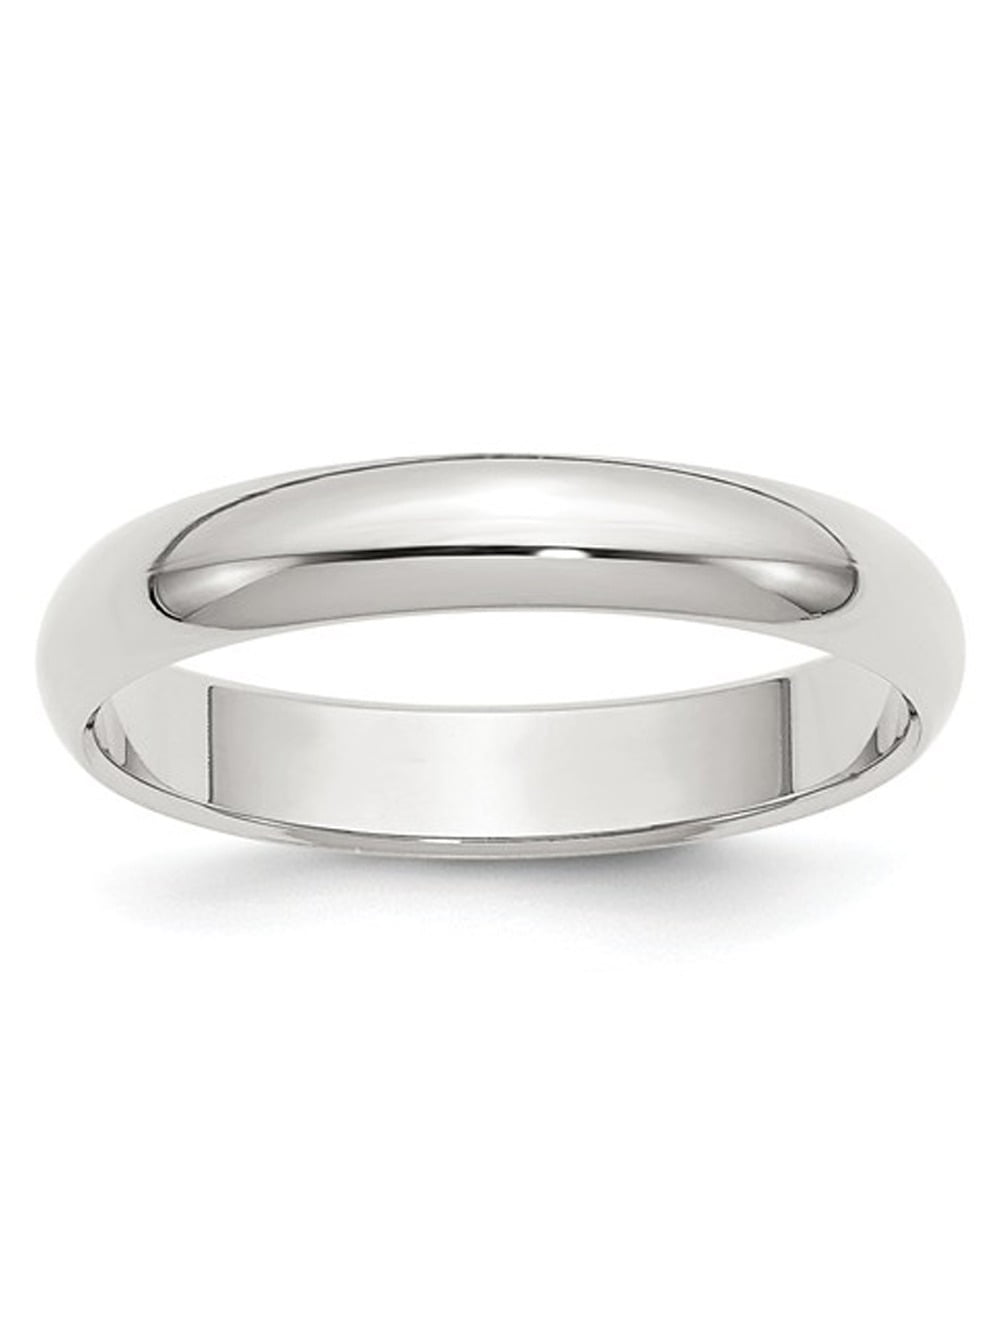 Gem And Harmony Mens 4mm Wedding Band Ring in Sterling